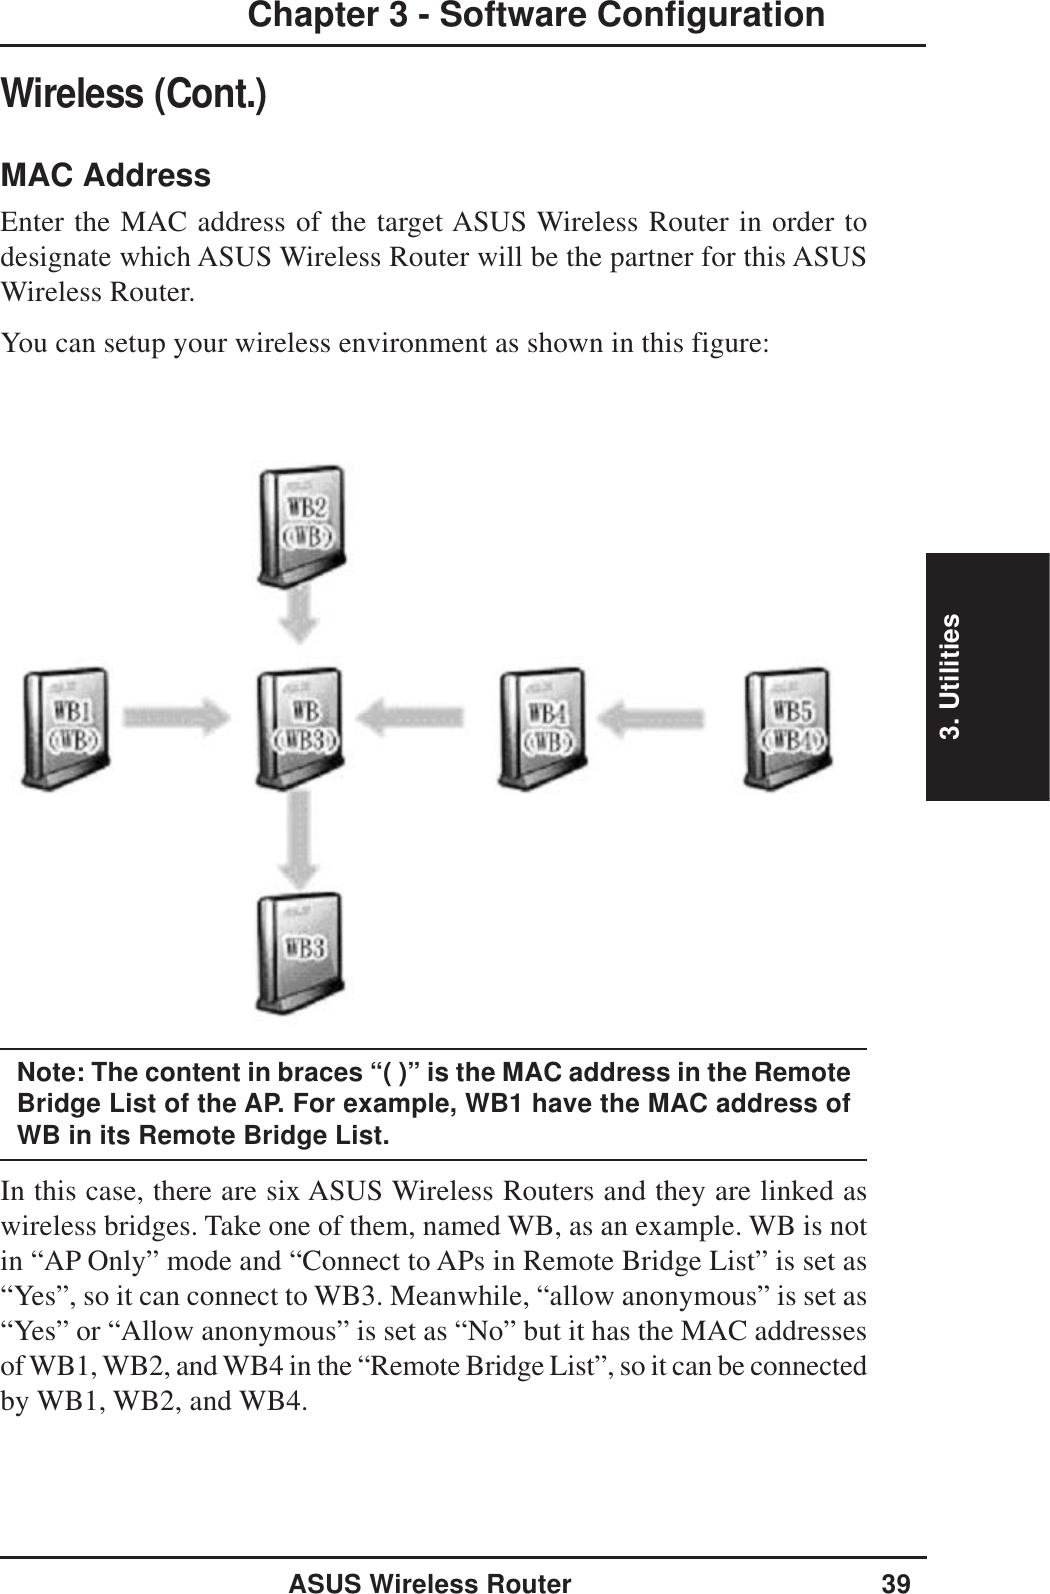 3. UtilitiesASUS Wireless Router 39Chapter 3 - Software ConfigurationWireless (Cont.)MAC AddressEnter the MAC address of the target ASUS Wireless Router in order todesignate which ASUS Wireless Router will be the partner for this ASUSWireless Router.You can setup your wireless environment as shown in this figure:Note: The content in braces “( )” is the MAC address in the RemoteBridge List of the AP. For example, WB1 have the MAC address ofWB in its Remote Bridge List.In this case, there are six ASUS Wireless Routers and they are linked aswireless bridges. Take one of them, named WB, as an example. WB is notin “AP Only” mode and “Connect to APs in Remote Bridge List” is set as“Yes”, so it can connect to WB3. Meanwhile, “allow anonymous” is set as“Yes” or “Allow anonymous” is set as “No” but it has the MAC addressesof WB1, WB2, and WB4 in the “Remote Bridge List”, so it can be connectedby WB1, WB2, and WB4.